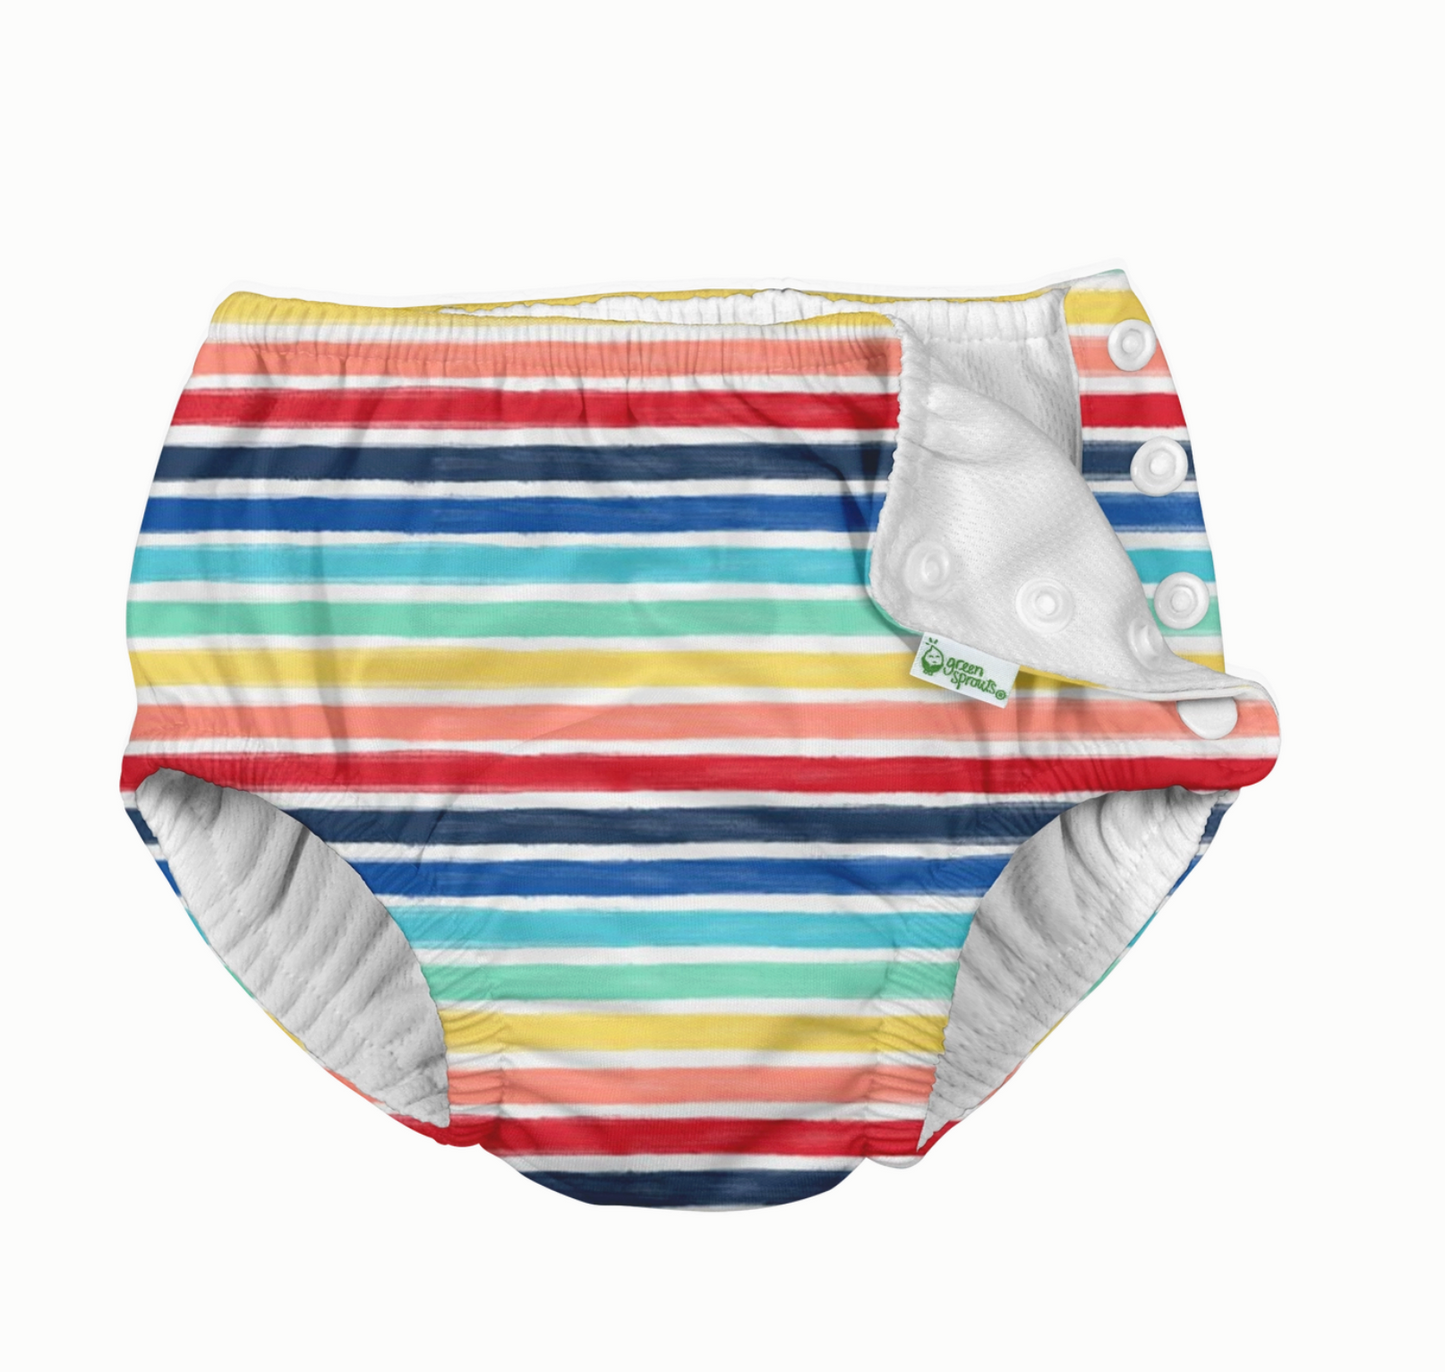 Green Sprouts Snap Reusable Absorbent Swimsuit Diaper - Multiple Prints/Colors